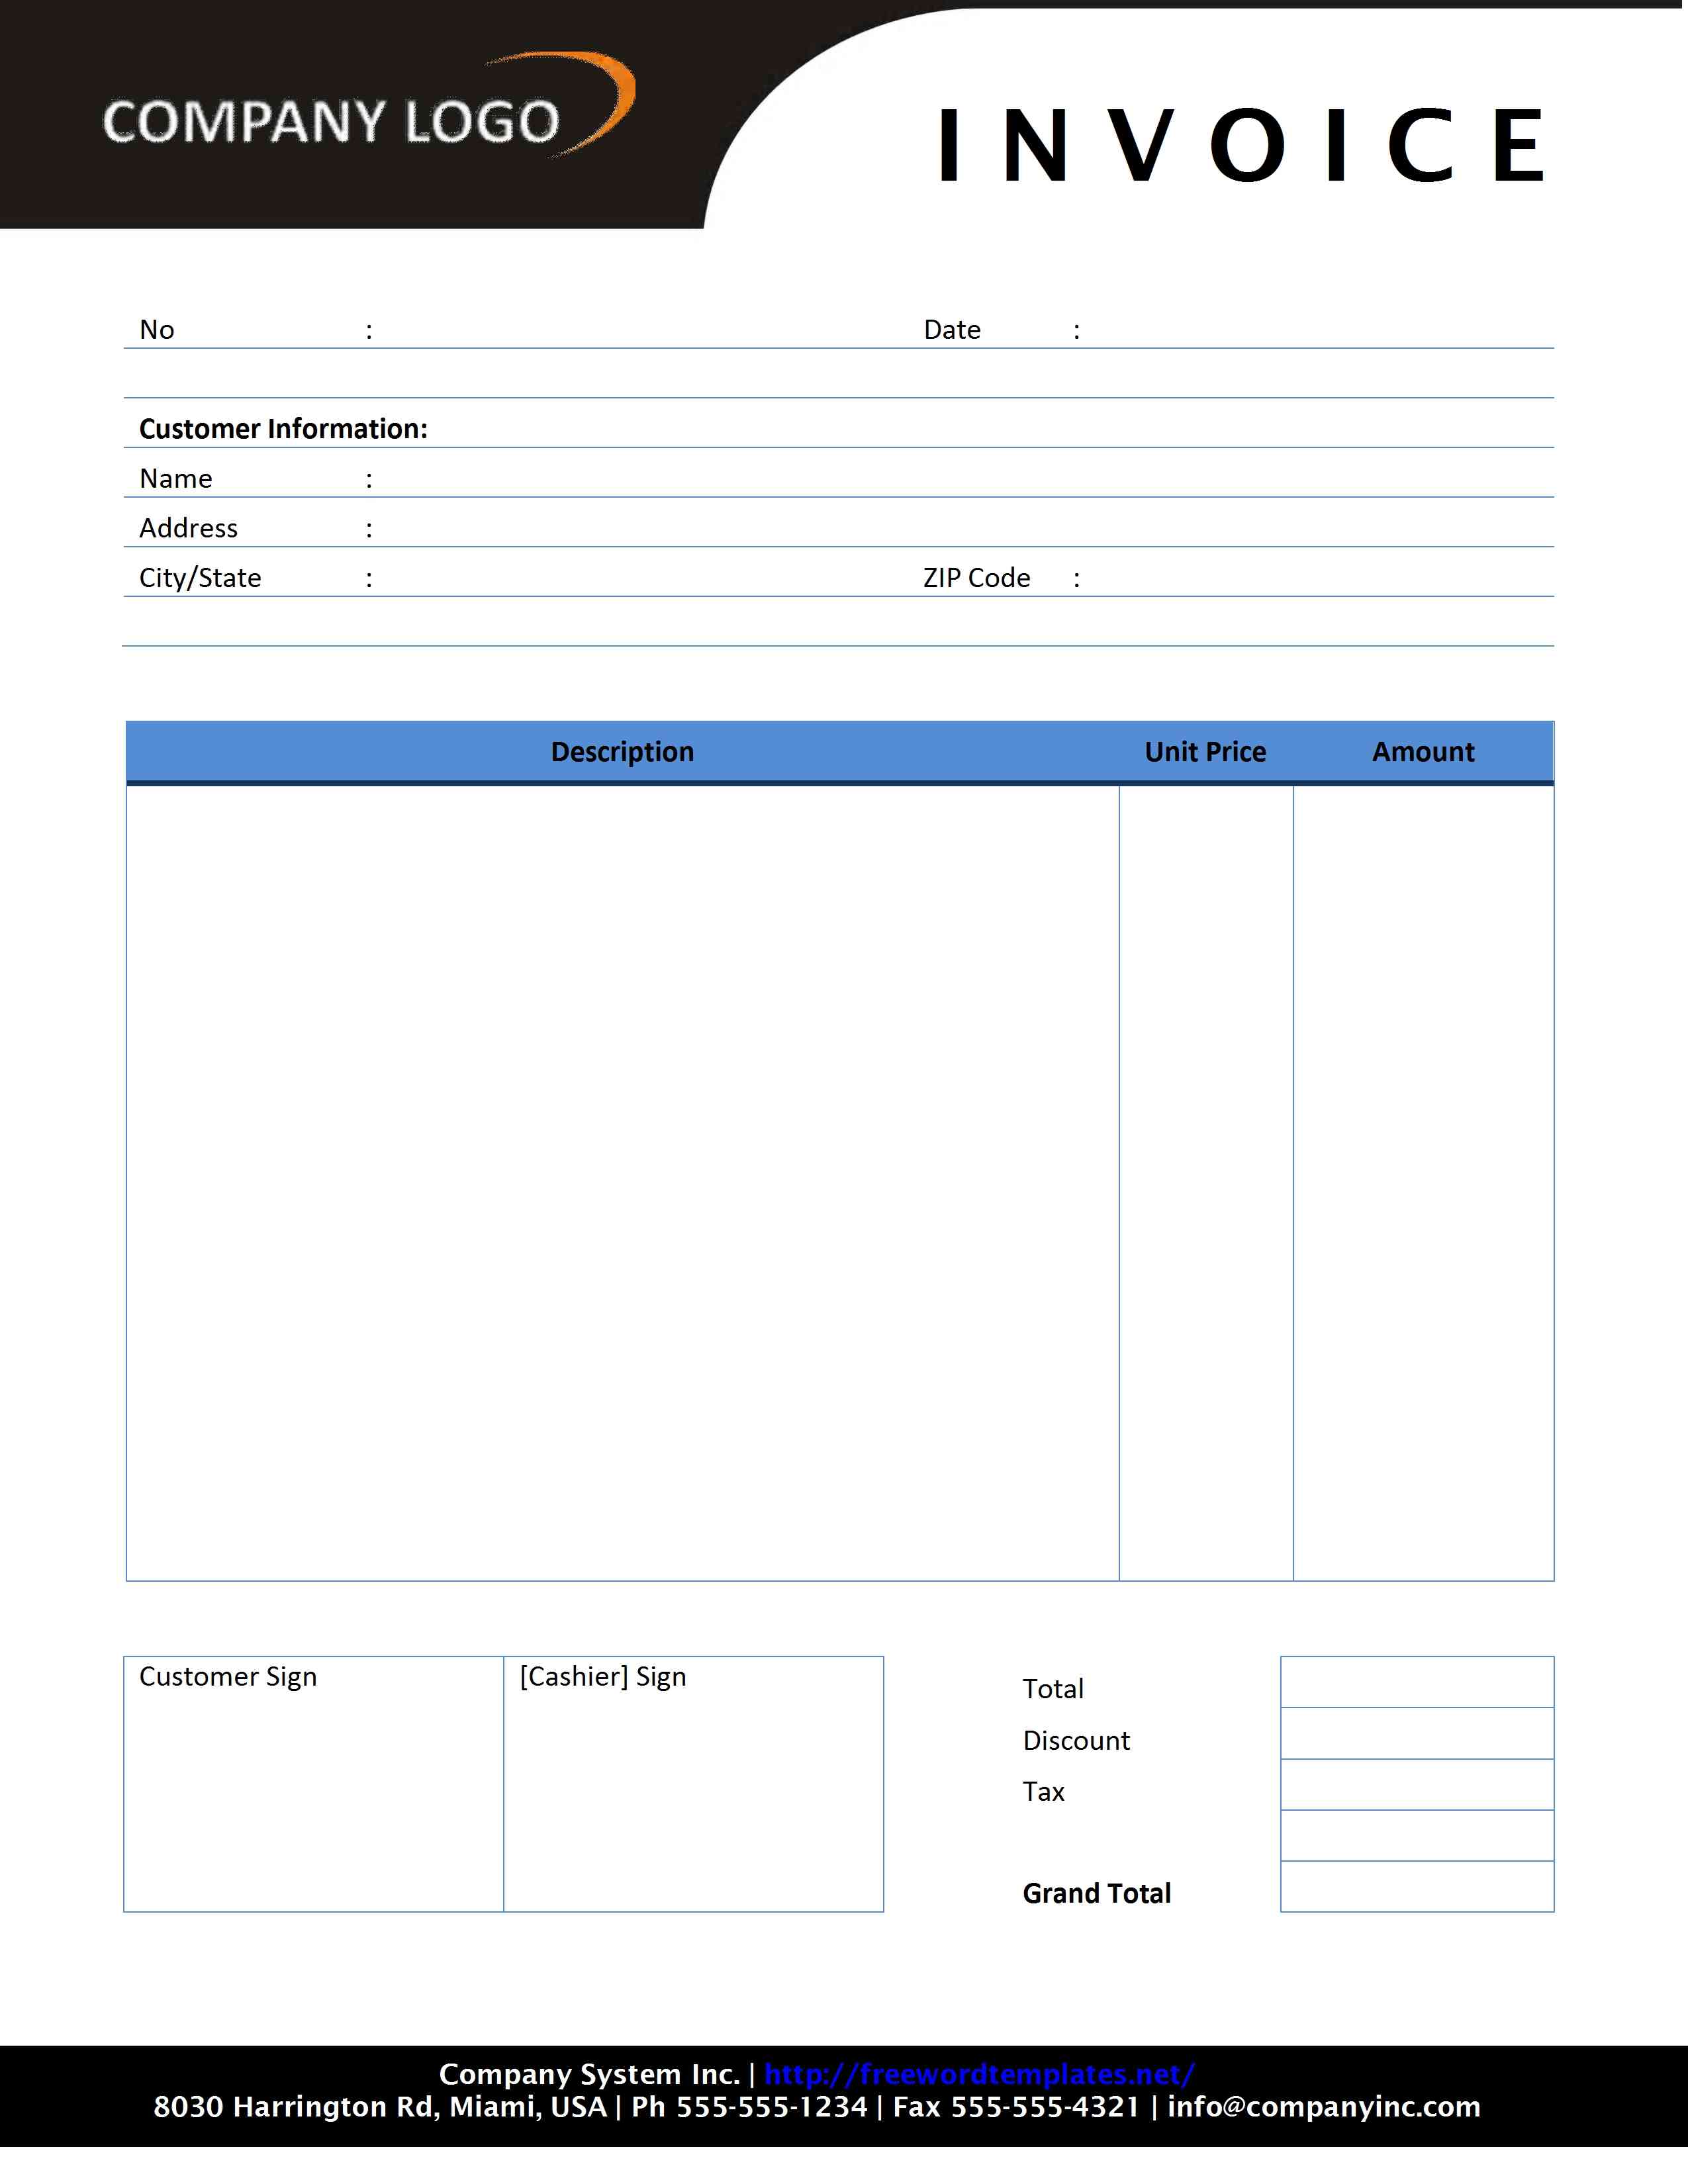 Rental Invoice Template | free to do list